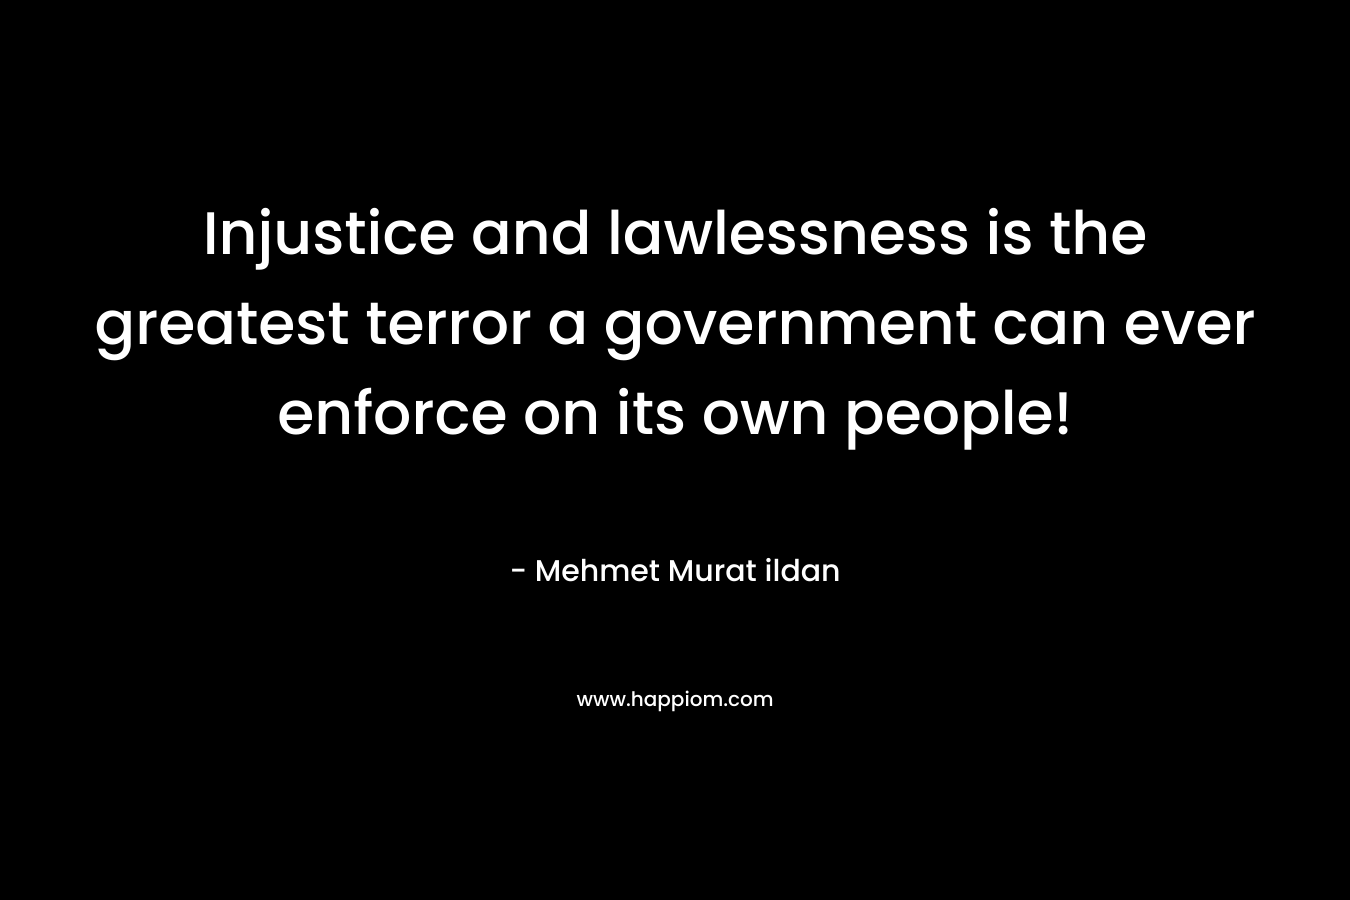 Injustice and lawlessness is the greatest terror a government can ever enforce on its own people! – Mehmet Murat ildan